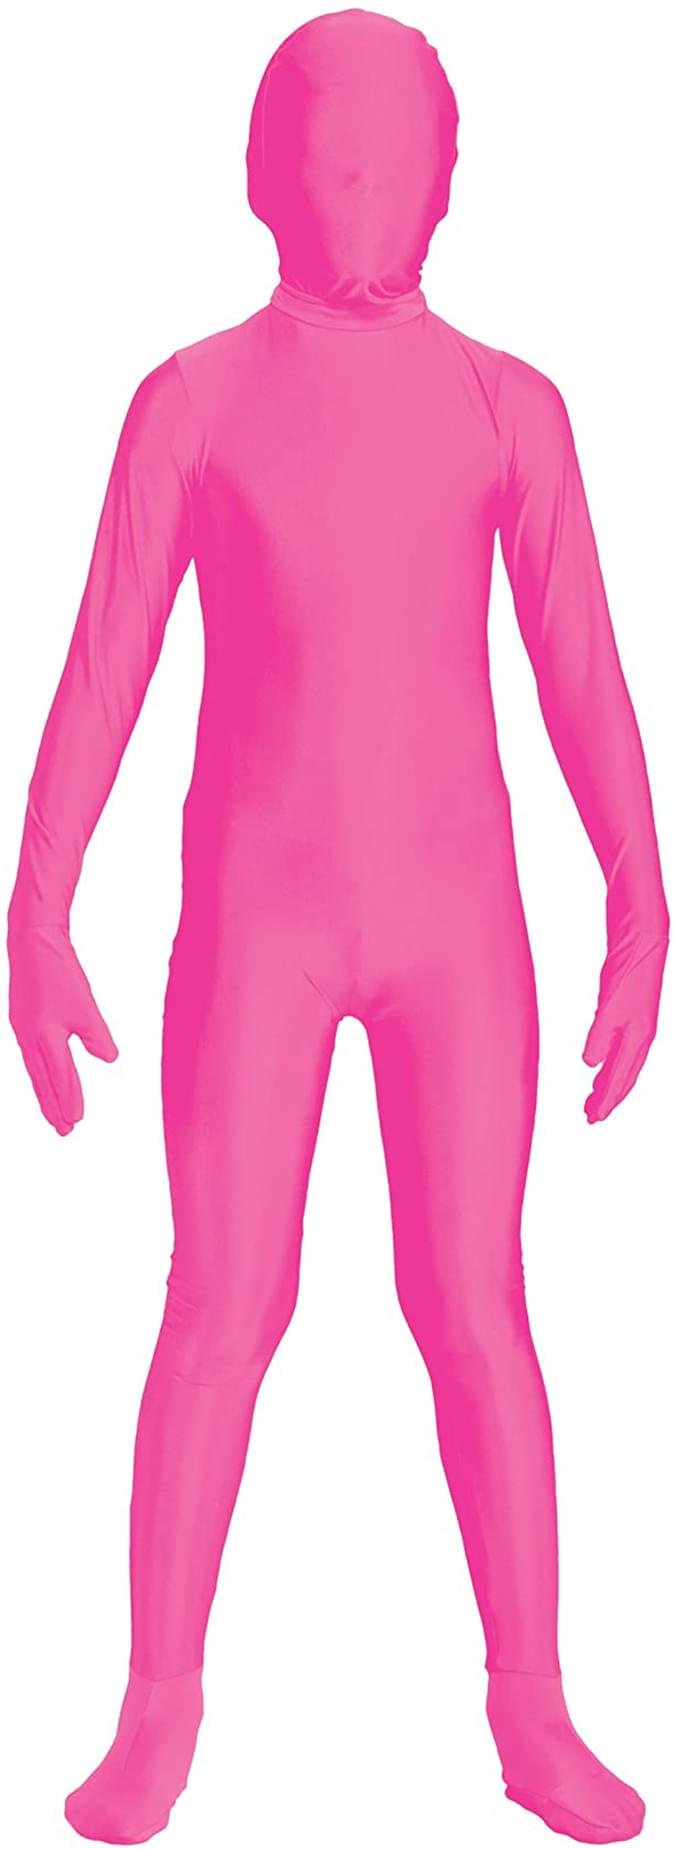 Disappearing Man Stretch Costume Jumpsuit Teen: Neon Pink